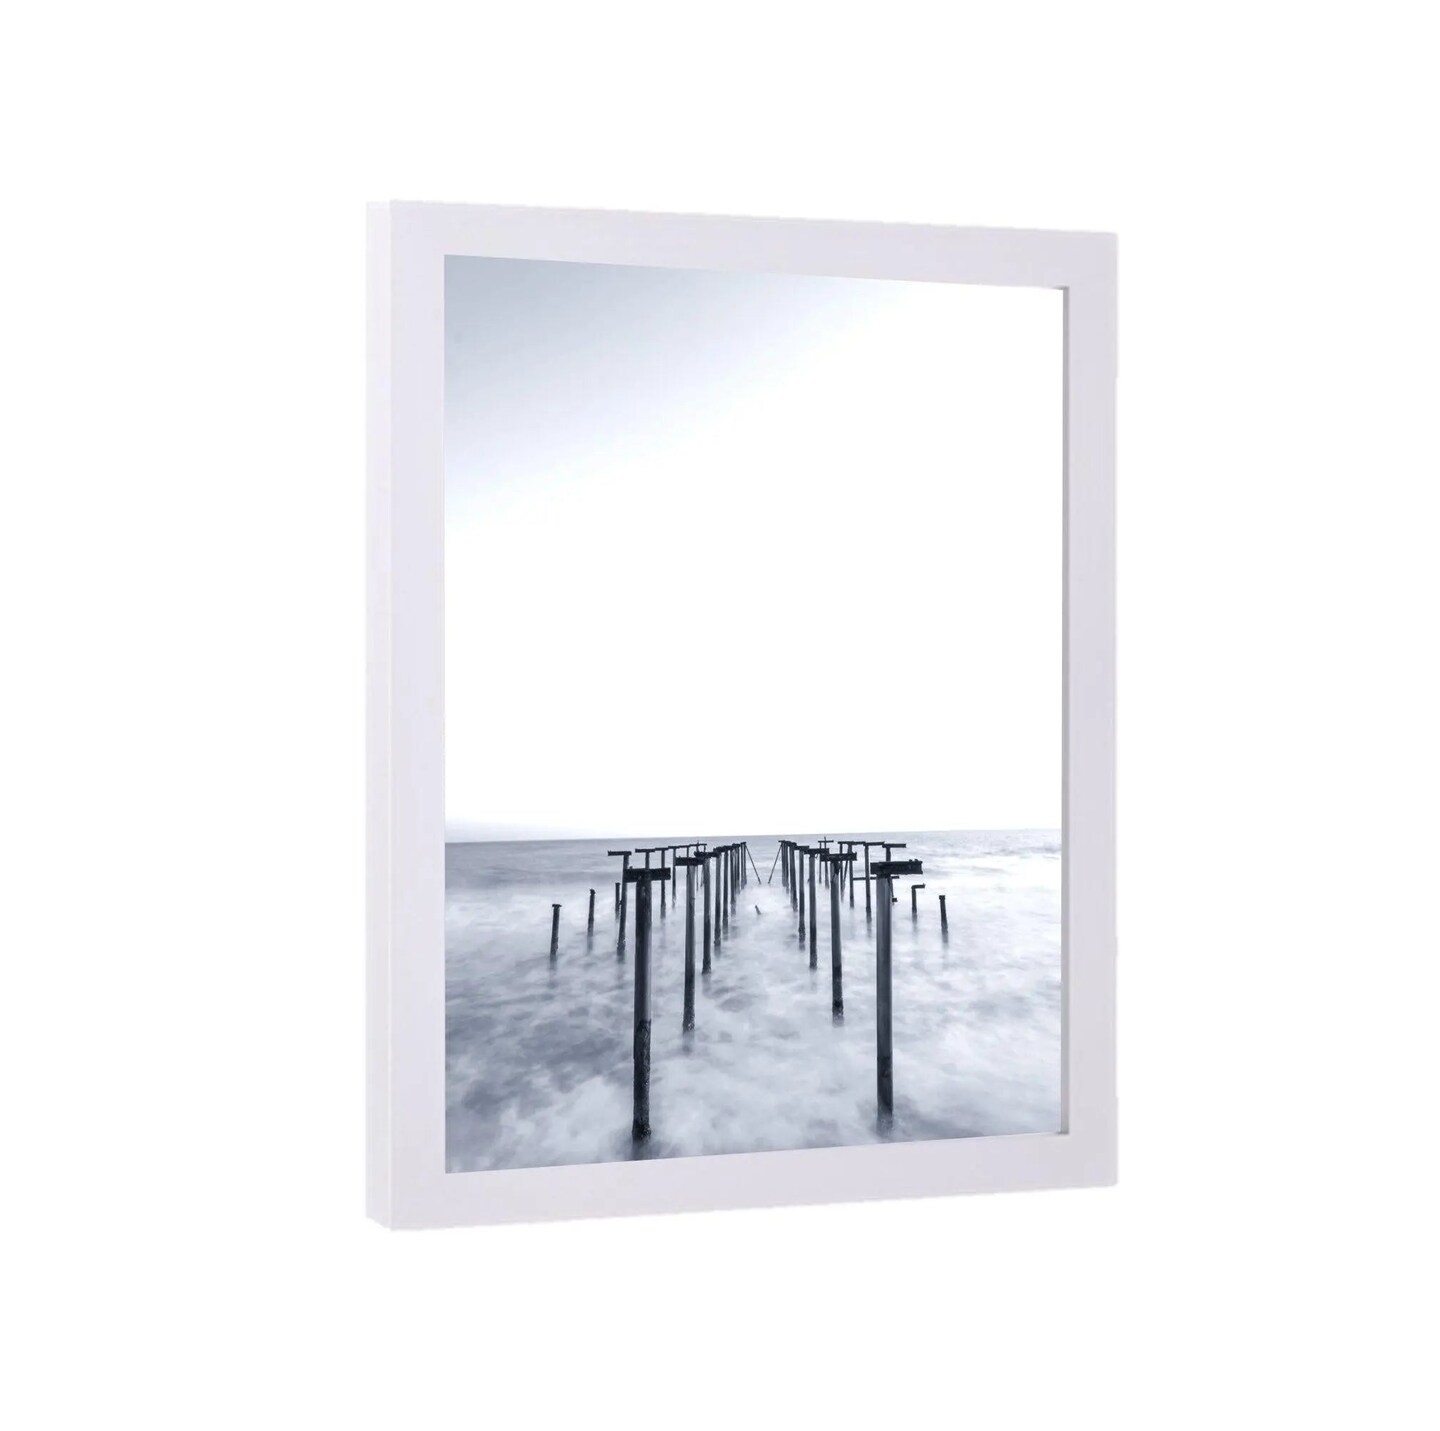 Gallery 24x24 Picture Frame Black 24x24 Frame 24 x 24 Photo Frames 24 x 24 Square